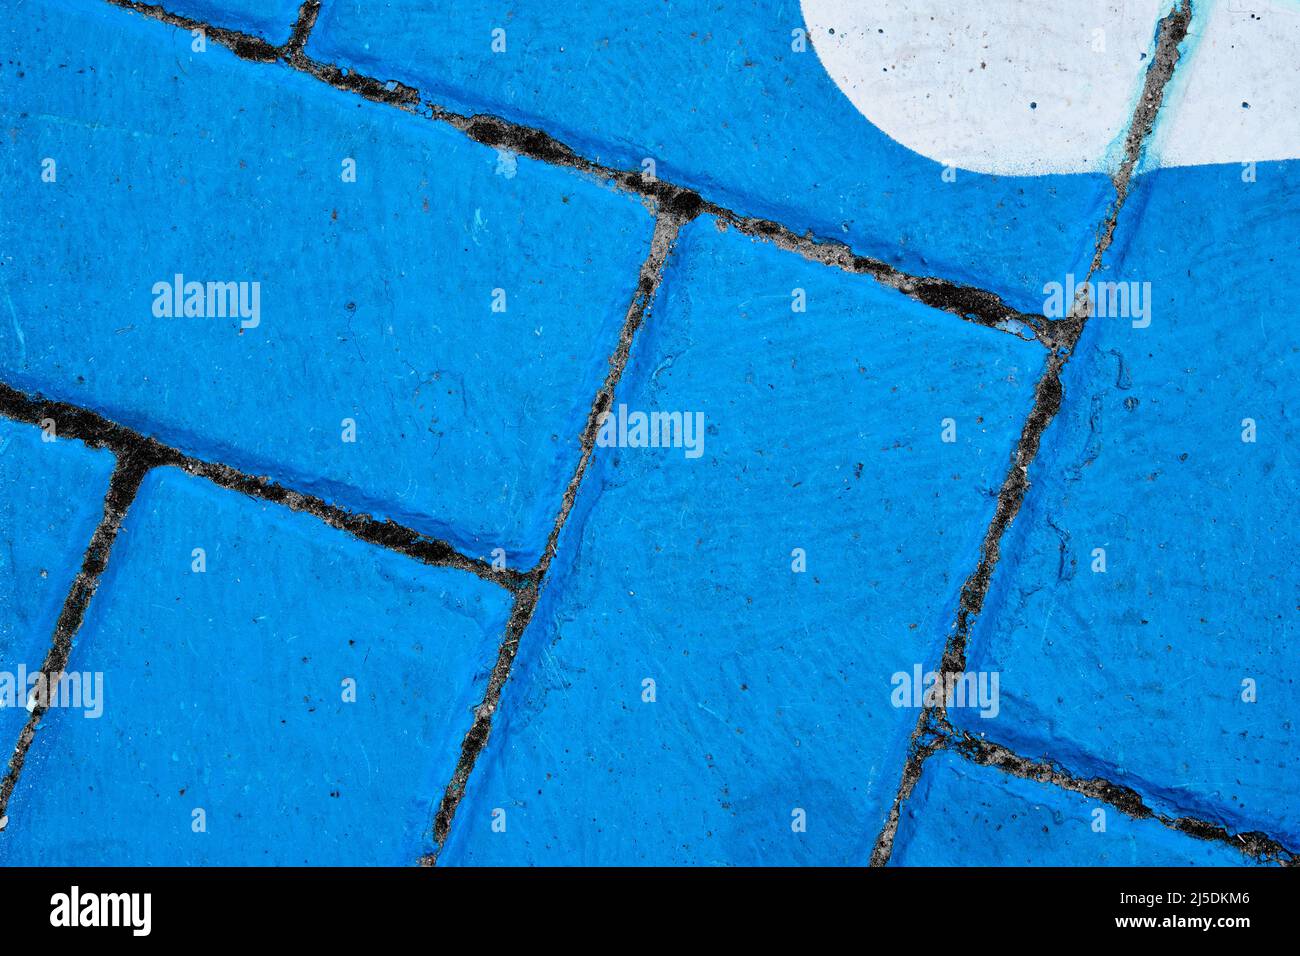 Diagonal lines of dark grout separate bricks painted blue.  An oval of white appears in the top right corner. Stock Photo